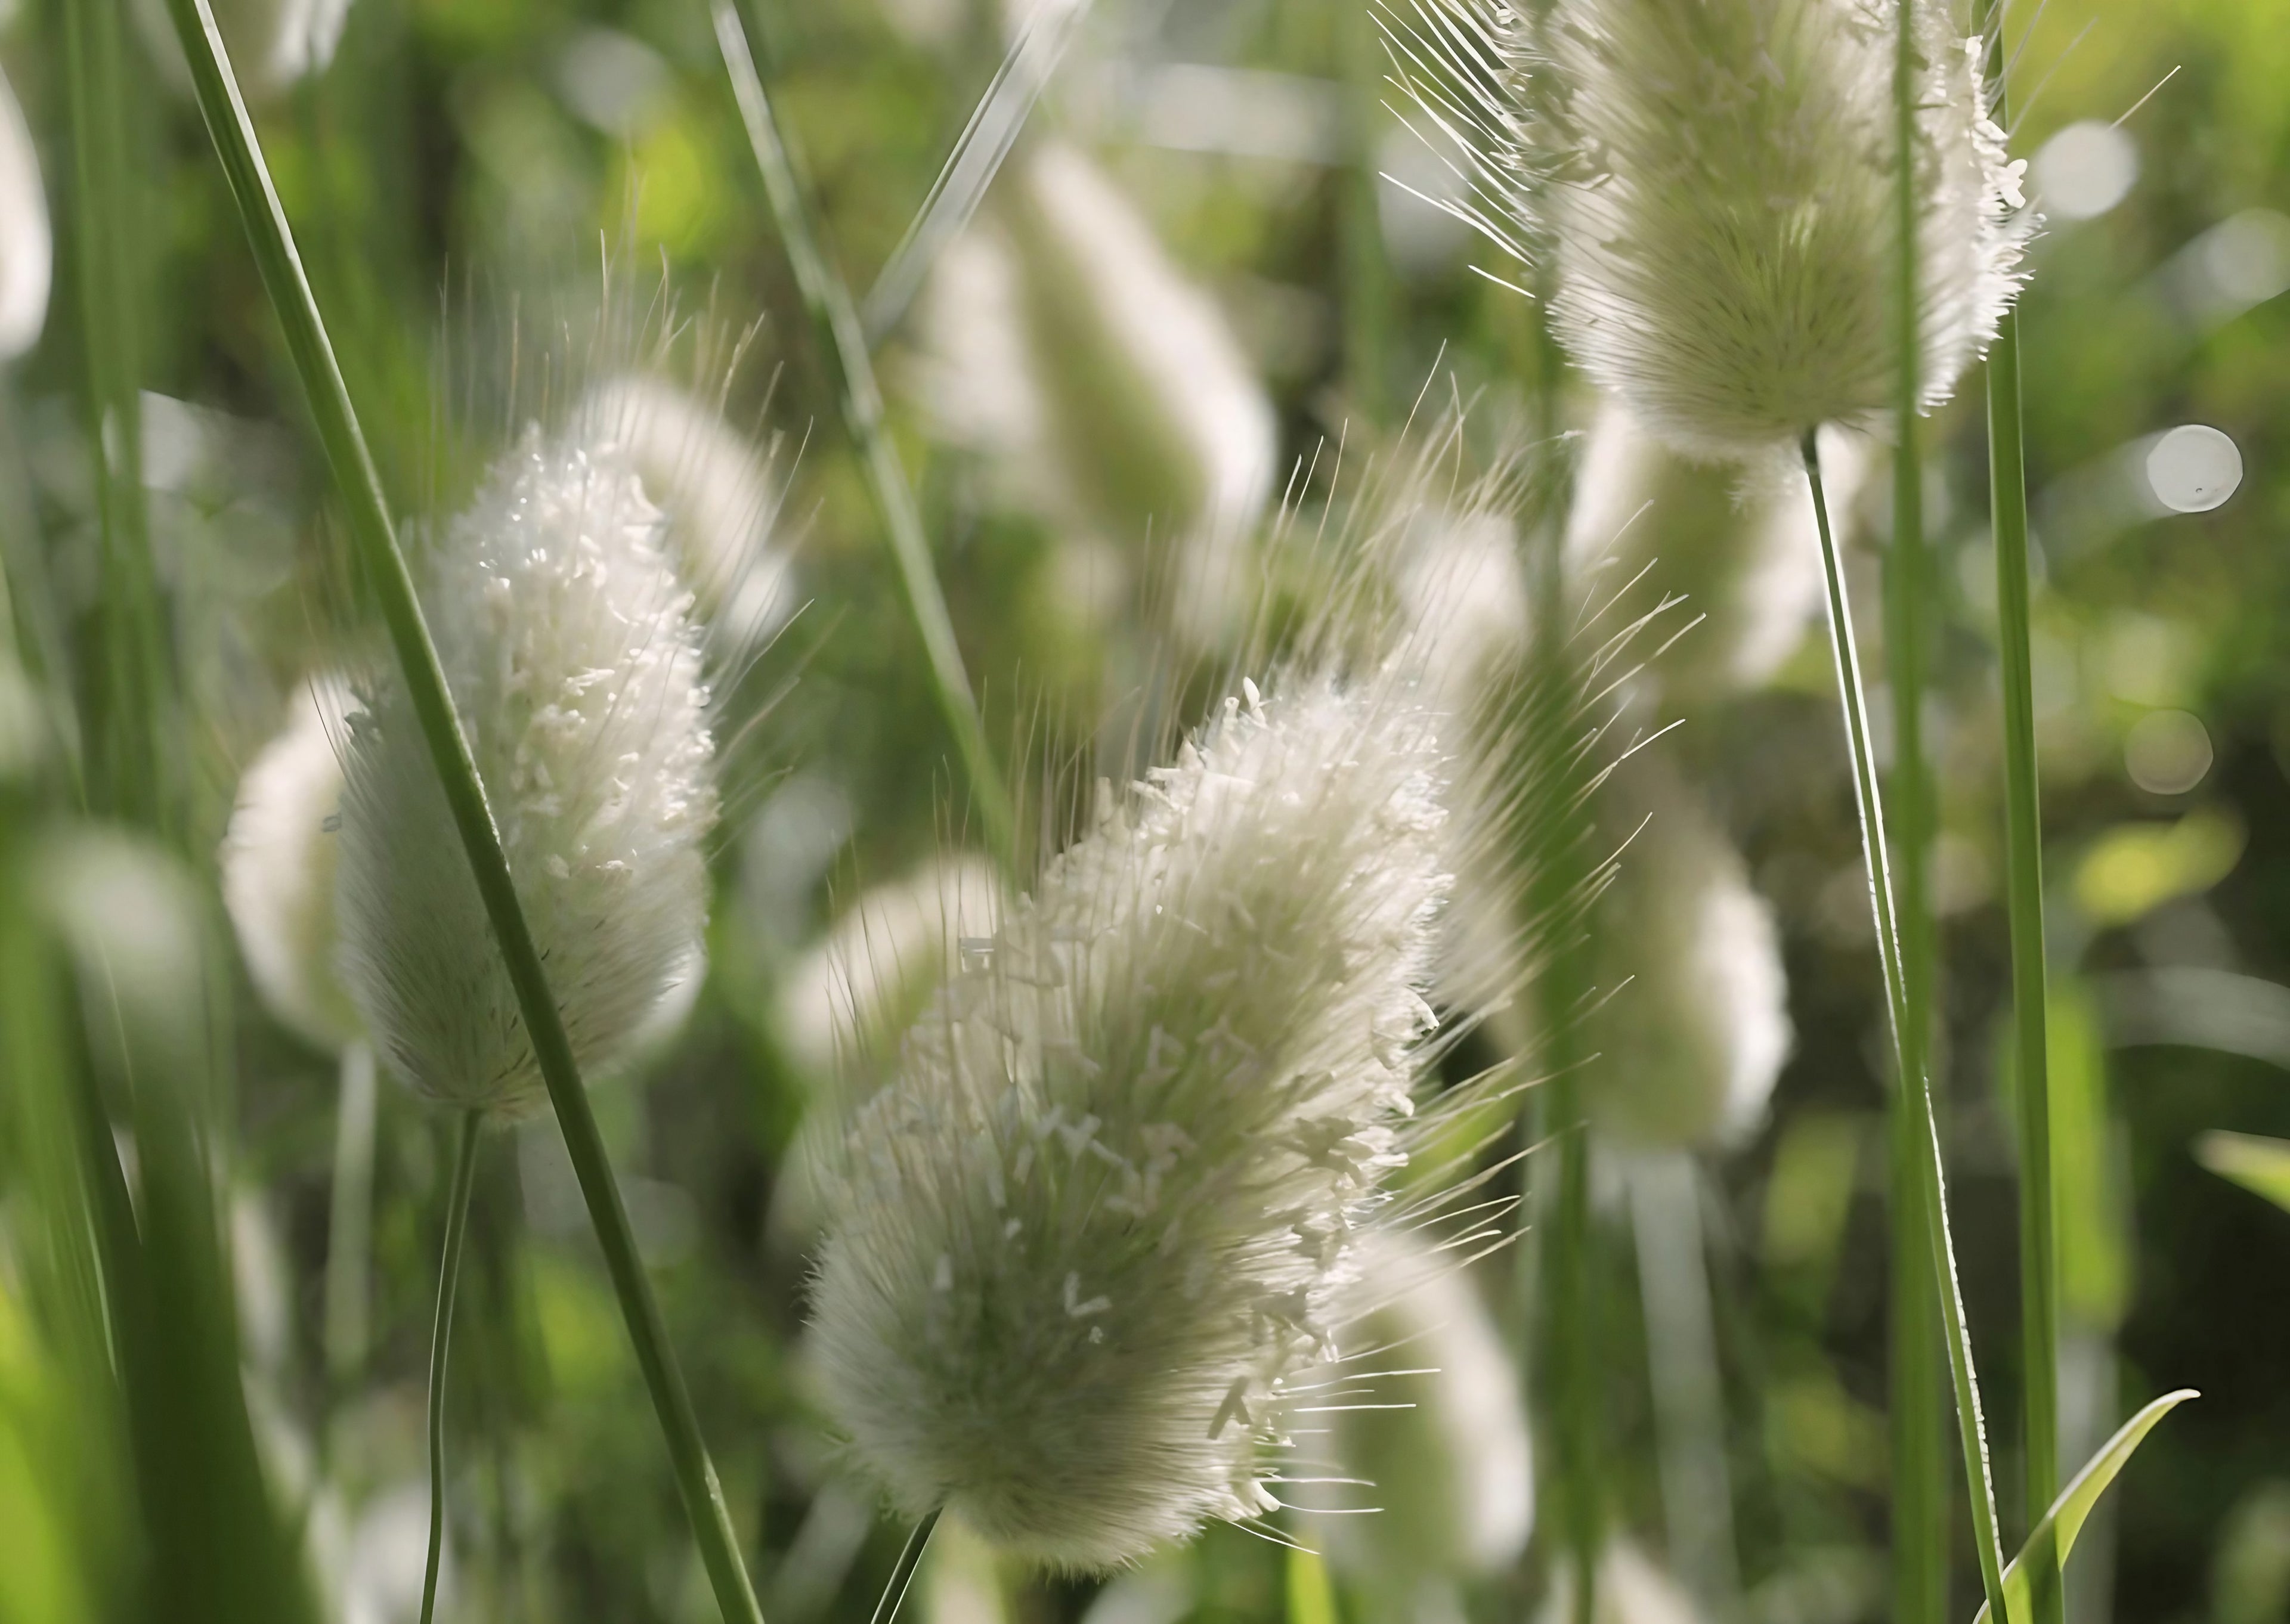 Detailed image of Lagurus Ovatus with its characteristic white fluffy blooms